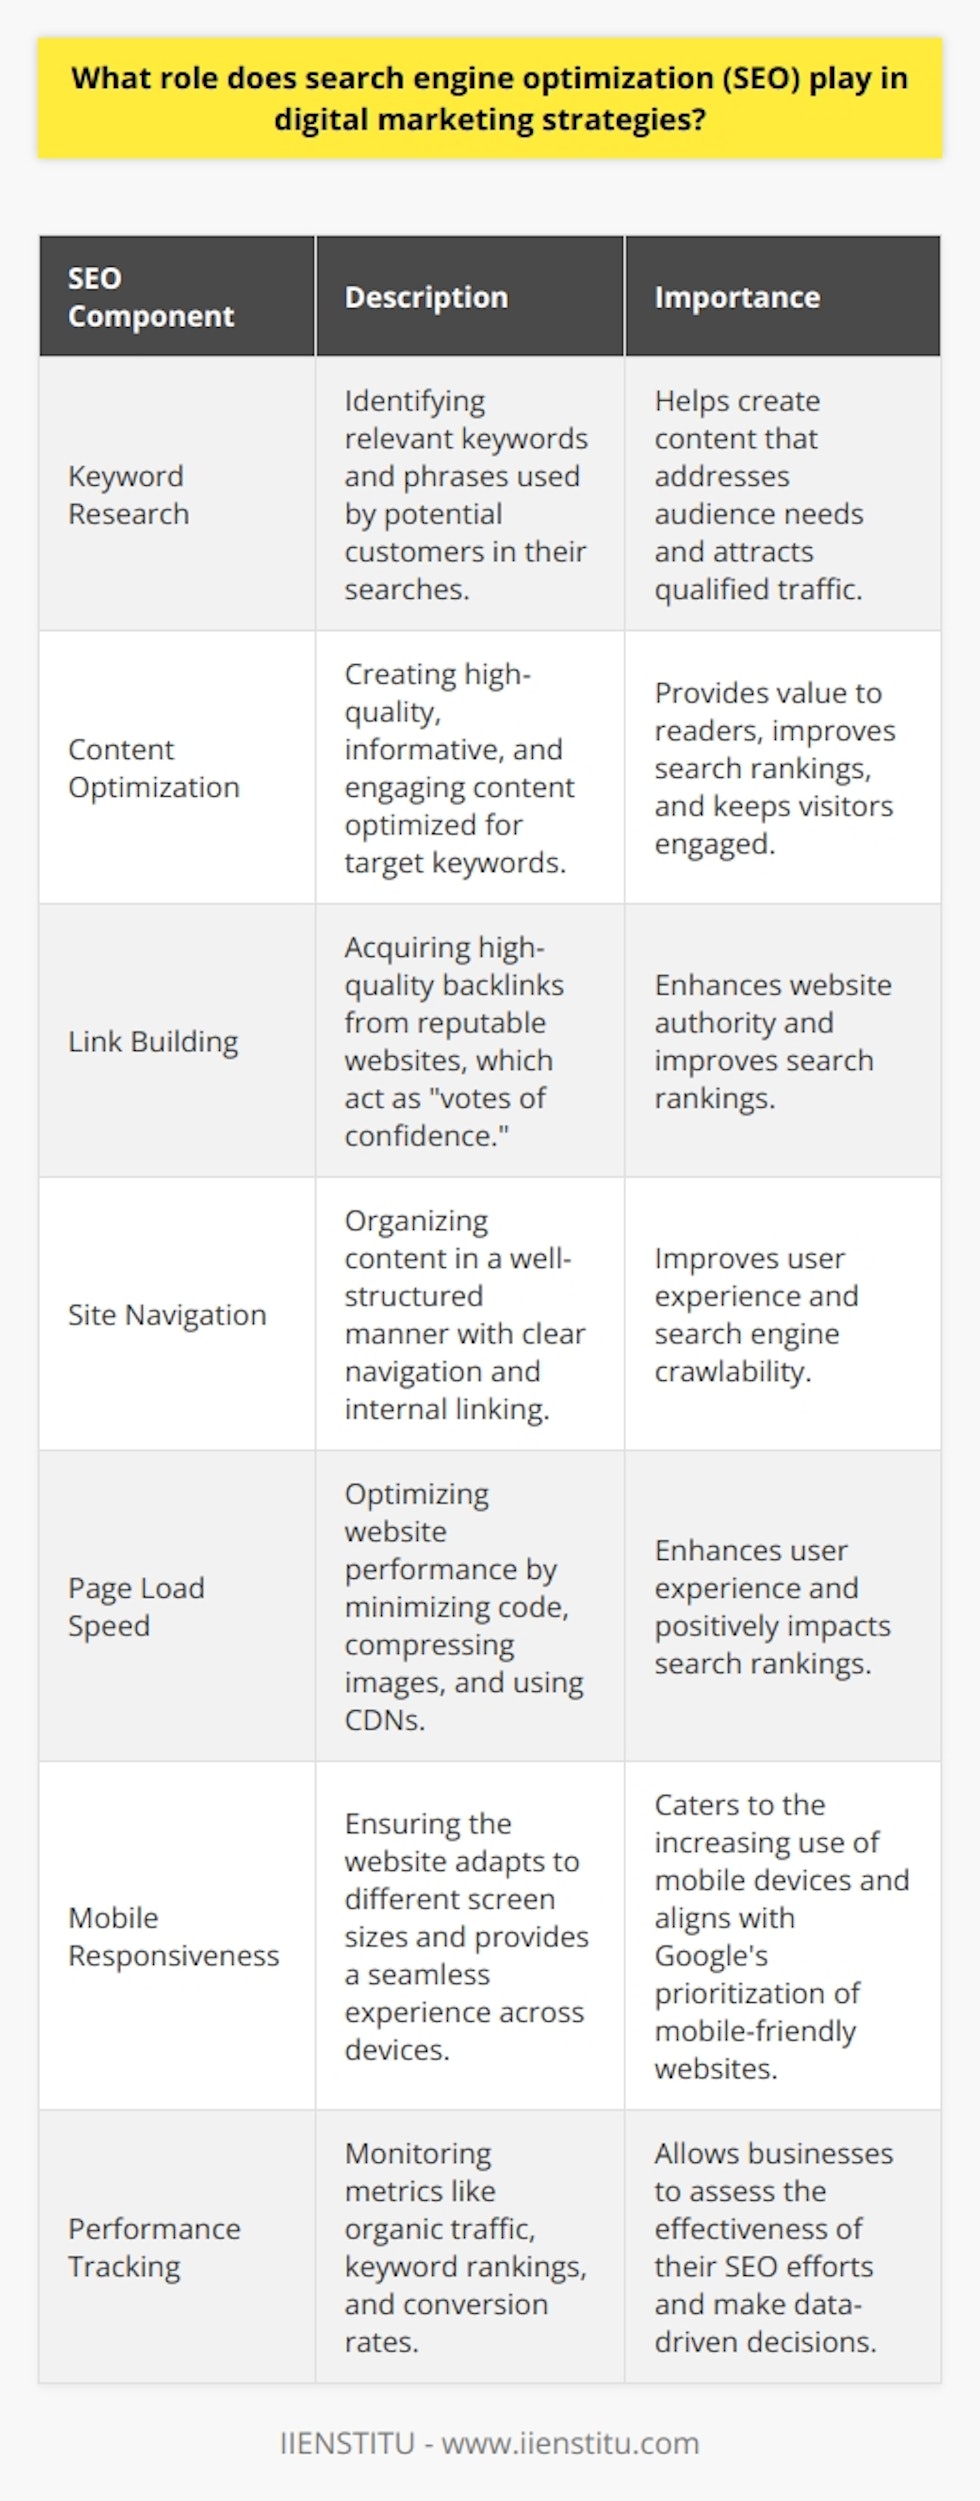 Search engine optimization (SEO) plays a crucial role in digital marketing strategies. It helps businesses improve their online visibility and attract more qualified traffic to their websites. By optimizing various on-page and off-page elements, companies can rank higher in search engine results pages (SERPs). Improving Organic Search Rankings SEO focuses on improving a websites organic search rankings. This is achieved through a combination of keyword research, content optimization, and link building. By identifying and targeting relevant keywords, businesses can create content that addresses their audiences needs and interests. Optimizing meta tags, headers, and images also contributes to better search rankings. Keyword Research and Targeting Effective keyword research involves identifying terms and phrases that potential customers use when searching for products or services. By targeting these keywords in website content, businesses can attract more qualified traffic. Long-tail keywords, which are more specific and less competitive, can help companies rank for niche topics. Content Optimization Creating high-quality, informative, and engaging content is essential for SEO success. Content should be optimized for target keywords while providing value to readers. Regular updates and fresh content can also improve search rankings and keep visitors coming back. Link Building Link building involves acquiring high-quality backlinks from other reputable websites. These links act as  votes of confidence  and can improve a websites authority and search rankings. However, its important to focus on natural, relevant links rather than engaging in spammy or manipulative tactics. Enhancing User Experience SEO also plays a role in enhancing user experience (UX) on a website. By improving site navigation, load times, and mobile responsiveness, businesses can create a more user-friendly environment. This can lead to lower bounce rates, longer visit durations, and higher conversion rates. Site Navigation and Structure A well-organized site structure and clear navigation make it easier for users and search engines to find content. By using descriptive URLs, breadcrumbs, and internal linking, businesses can improve site usability and search engine crawlability. Page Load Speed Fast-loading pages are essential for a positive user experience and SEO. Slow load times can lead to higher bounce rates and lower search rankings. Optimizing images, minifying code, and using content delivery networks (CDNs) can help improve page load speed. Mobile Responsiveness With the increasing use of mobile devices, having a mobile-friendly website is crucial for SEO. Responsive design ensures that a website adapts to different screen sizes and provides a seamless user experience across devices. Google also prioritizes mobile-friendly websites in its search results. Measuring and Analyzing Performance SEO involves continuous measurement and analysis to track performance and identify areas for improvement. By monitoring key metrics such as organic traffic, keyword rankings, and conversion rates, businesses can assess the effectiveness of their SEO efforts and make data-driven decisions. Tracking Organic Traffic Monitoring organic traffic helps businesses understand how well their SEO strategies are driving visitors to their website. Tools like Google Analytics provide insights into traffic sources, user behavior, and conversion rates. Monitoring Keyword Rankings Regularly tracking keyword rankings allows businesses to see how well their website is performing for target keywords. This information can help identify opportunities for improvement and adjust SEO strategies accordingly. Analyzing Conversion Rates Ultimately, the goal of SEO is to drive conversions and revenue. By analyzing conversion rates from organic traffic, businesses can determine the effectiveness of their SEO efforts in achieving business objectives. In conclusion, SEO is a fundamental component of digital marketing strategies. By improving organic search rankings, enhancing user experience, and measuring performance, businesses can attract more qualified traffic, engage visitors, and ultimately drive conversions and revenue.